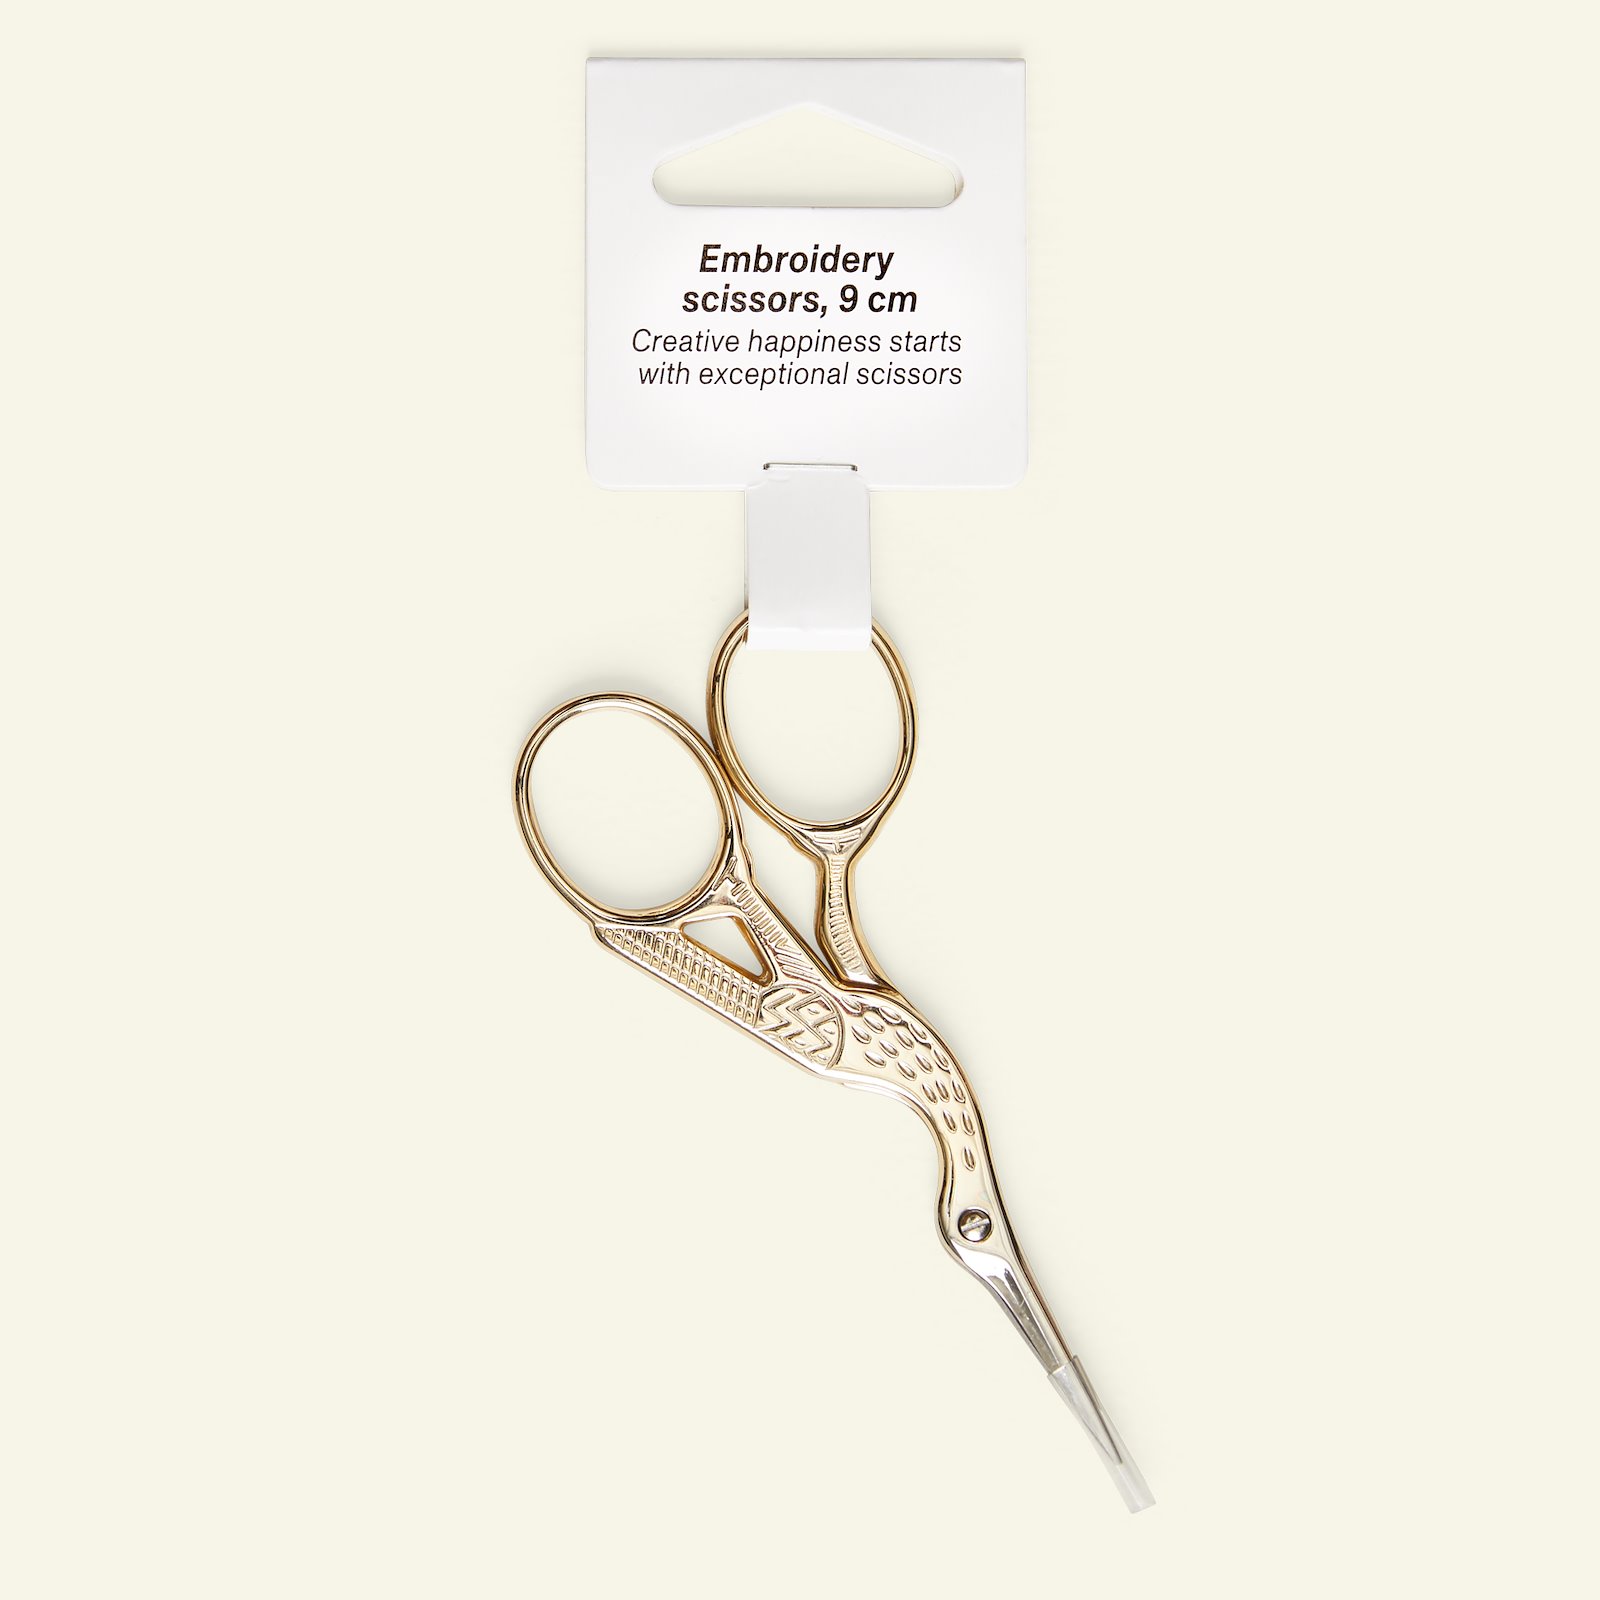 Embroidery scissors stork 9cm gold col. 42012_pack_b